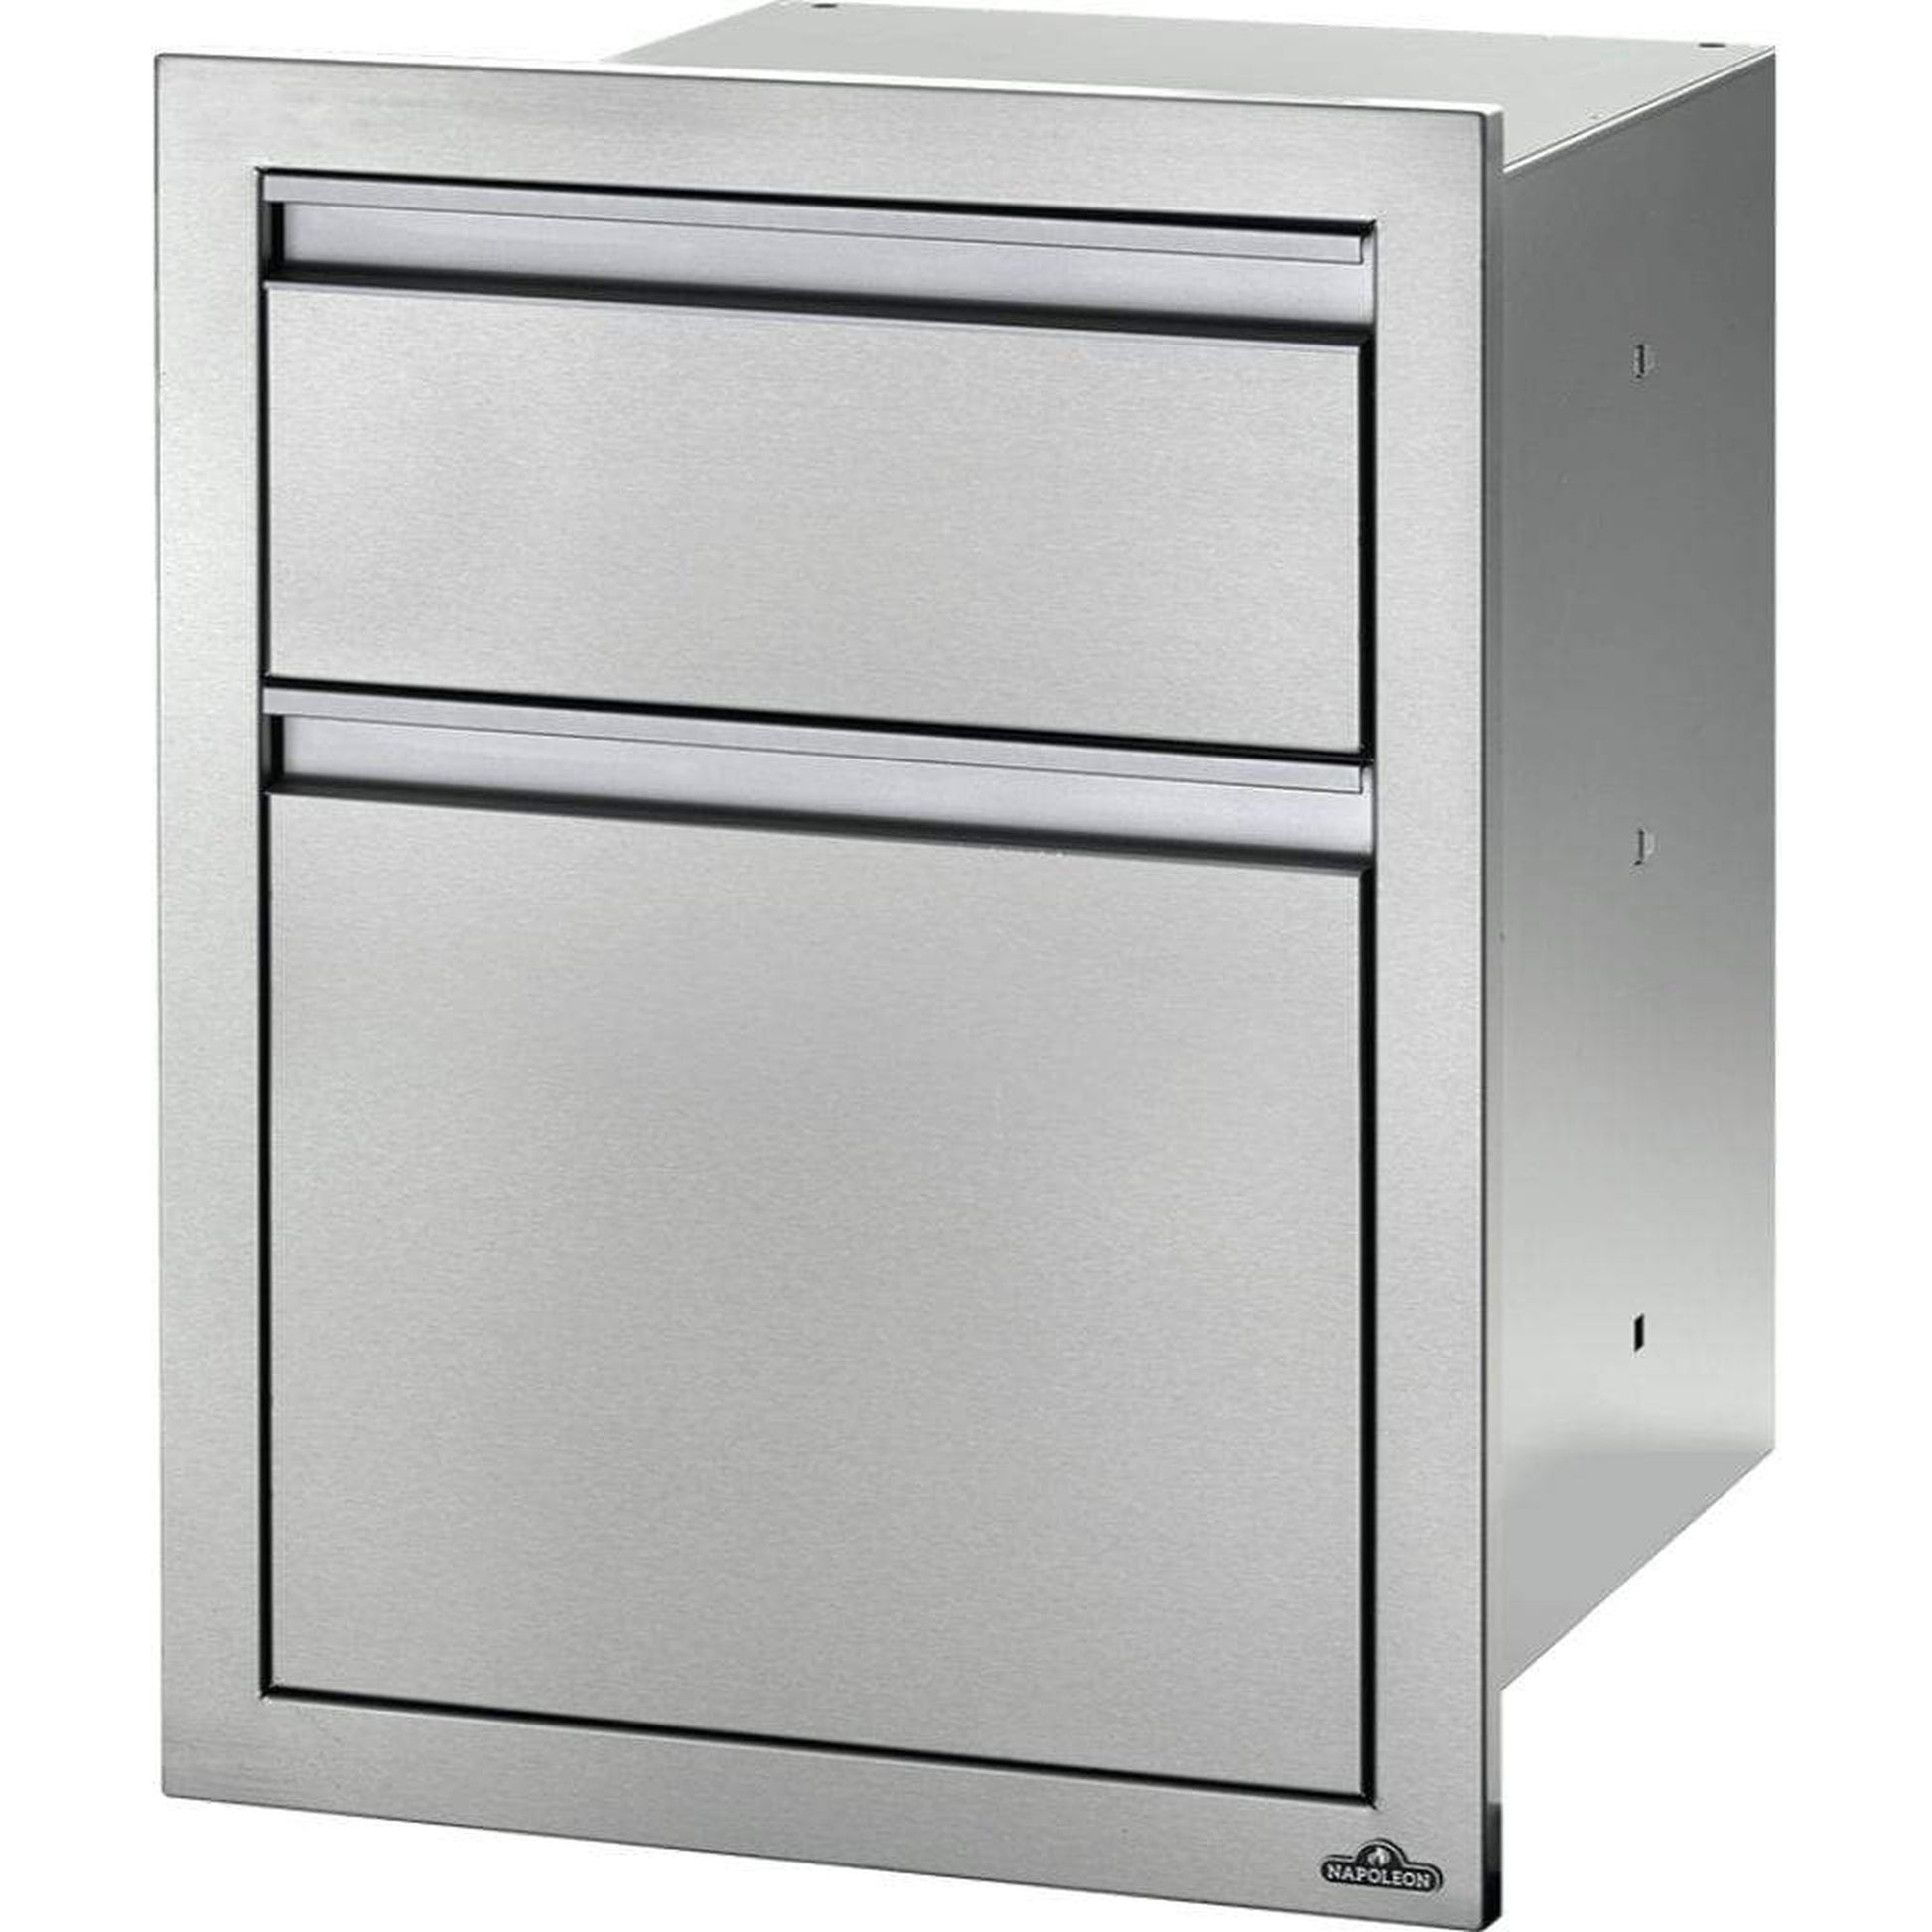 Napoleon 18" Stainless Steel Double Waste Bin Drawer With Paper Towel Holder